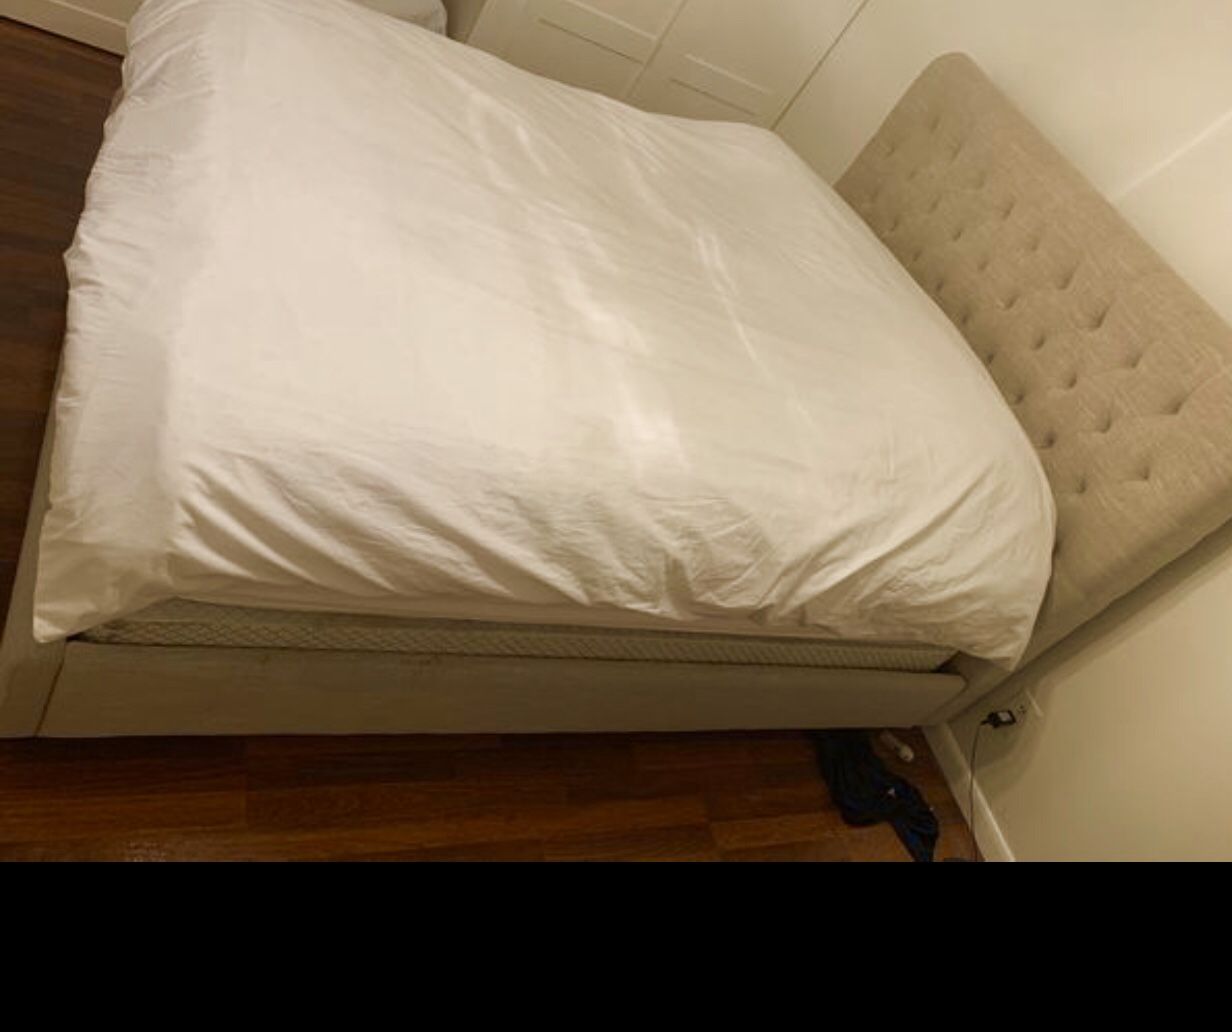 Excellent condition tan/ beige bed frame mattress not included